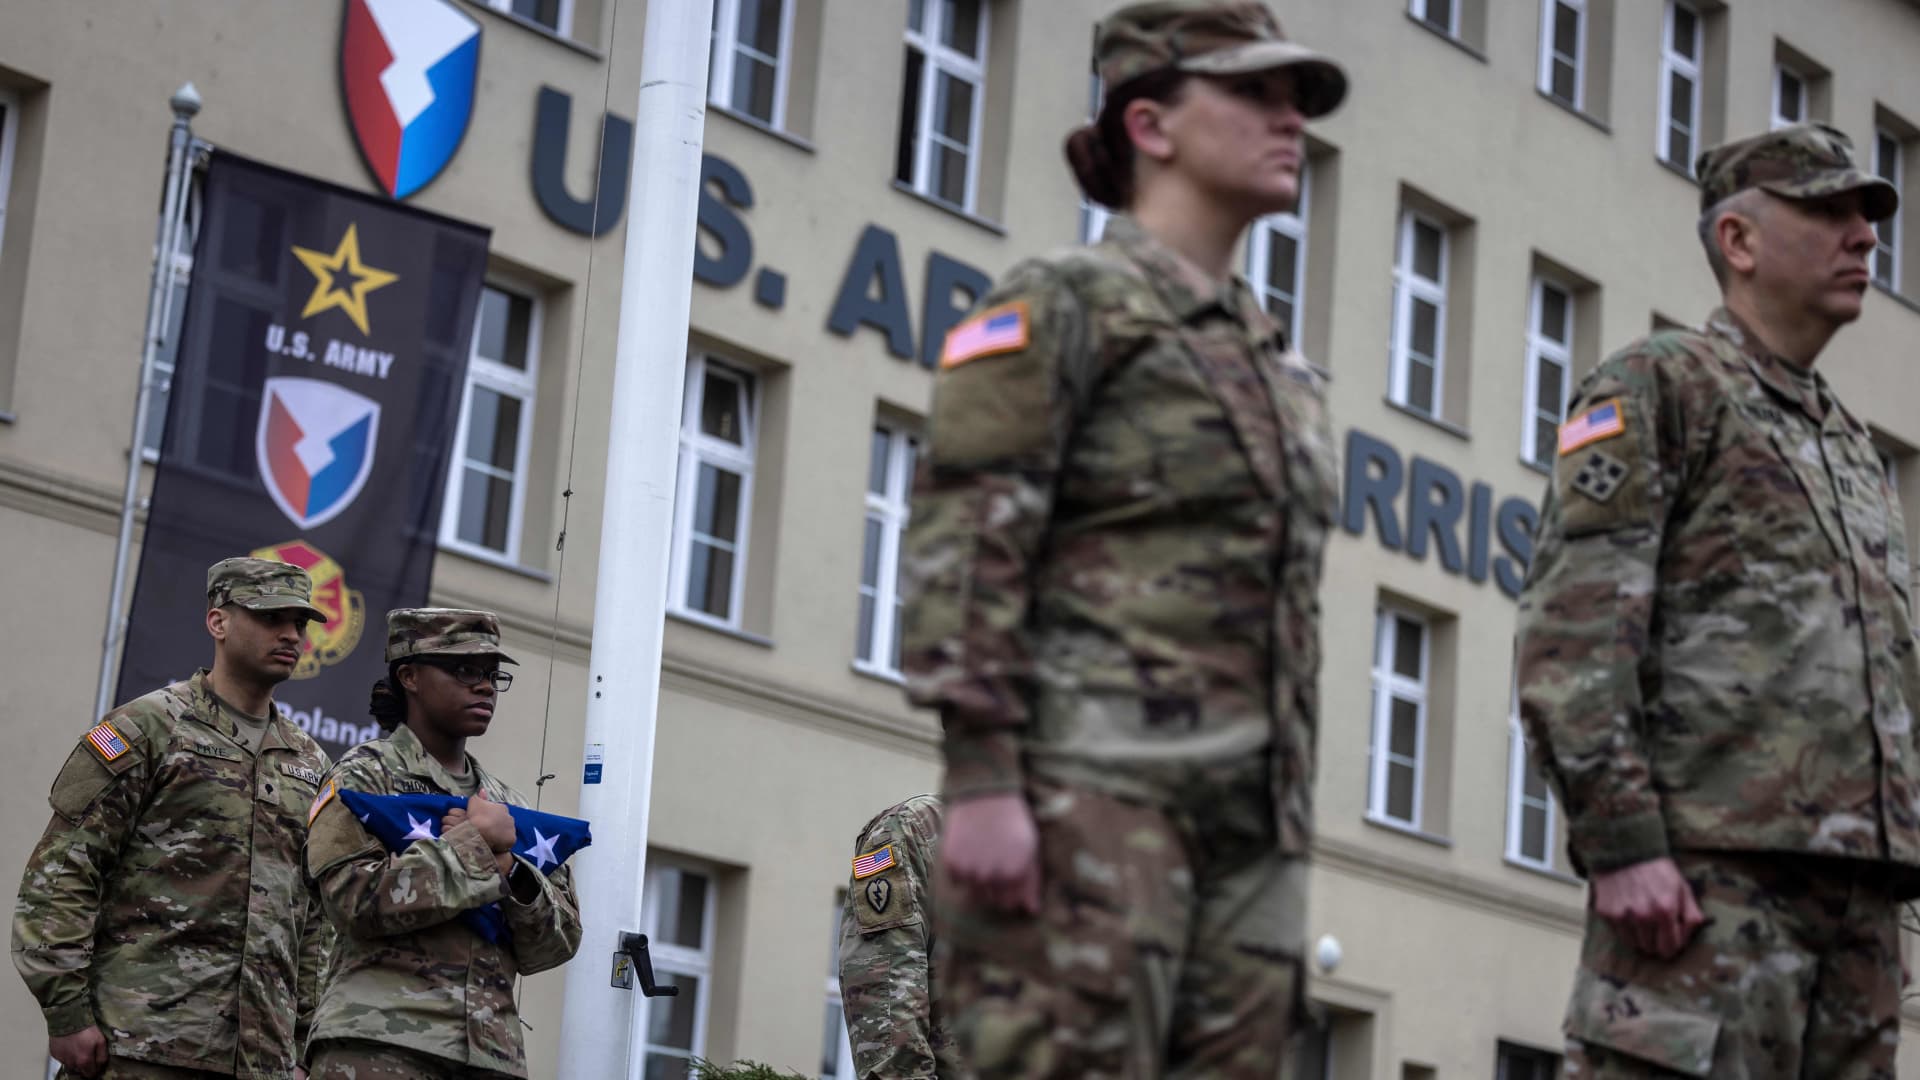 An US soldier holds the US flag as she takes part in the inauguration ceremony, transforming the Area Support Group Poland into the permanent US Army Garrison Poland, at Camp Kosciuszko in Poznan, on March 21, 2023. 